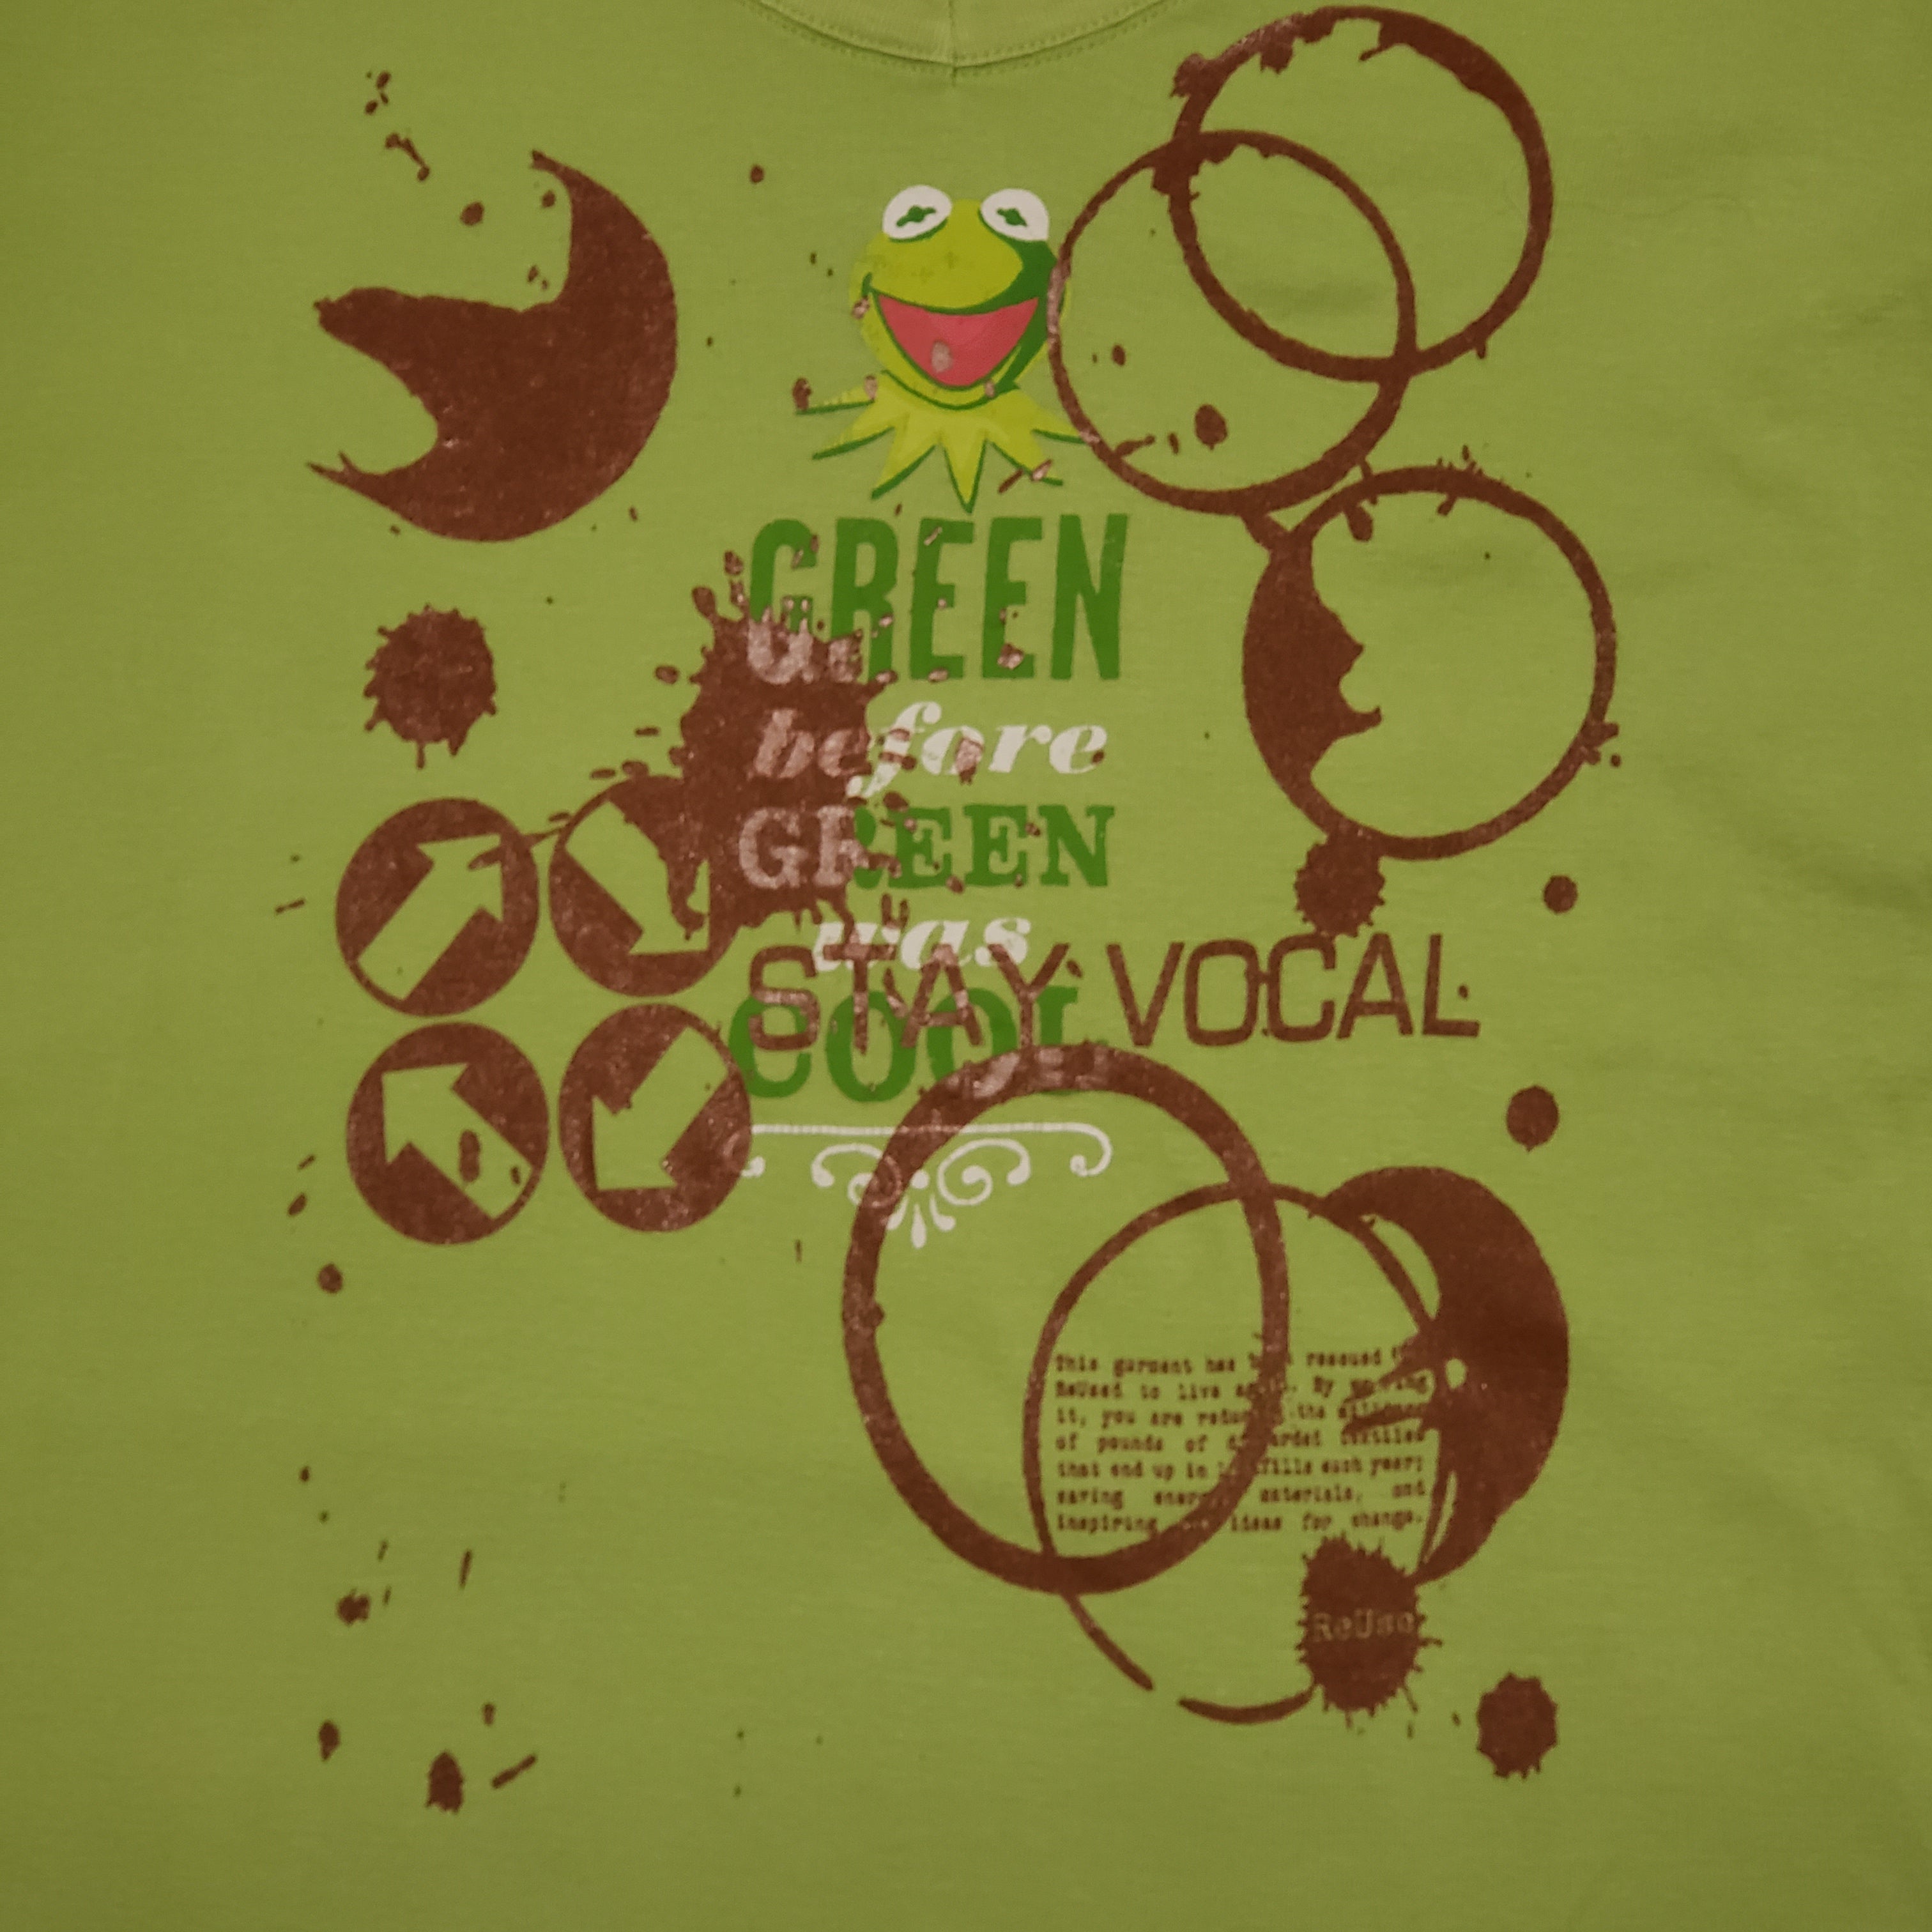 One of a Kind (Women's M) Coffee with Kermit The Frog T-Shirt